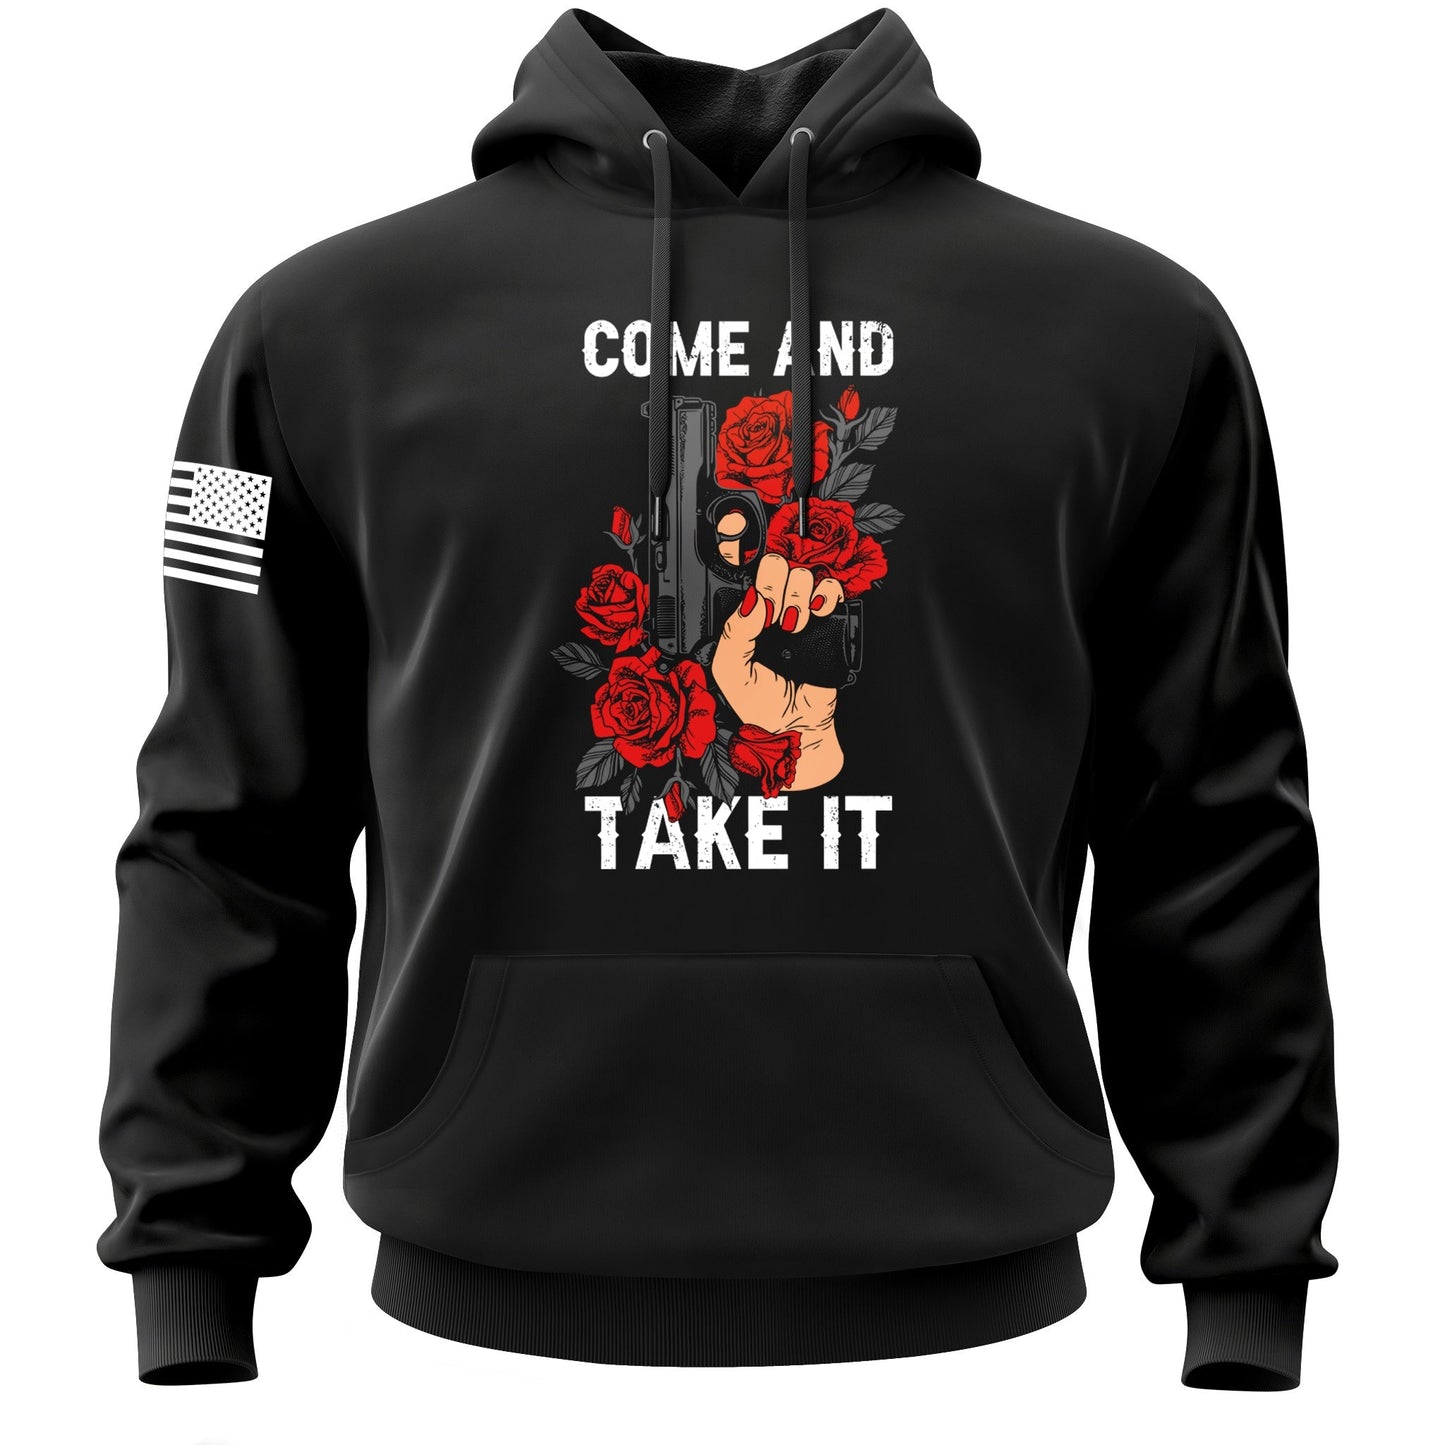 Come and Take It V2 Hoodie - Tactical Pro Supply, LLC